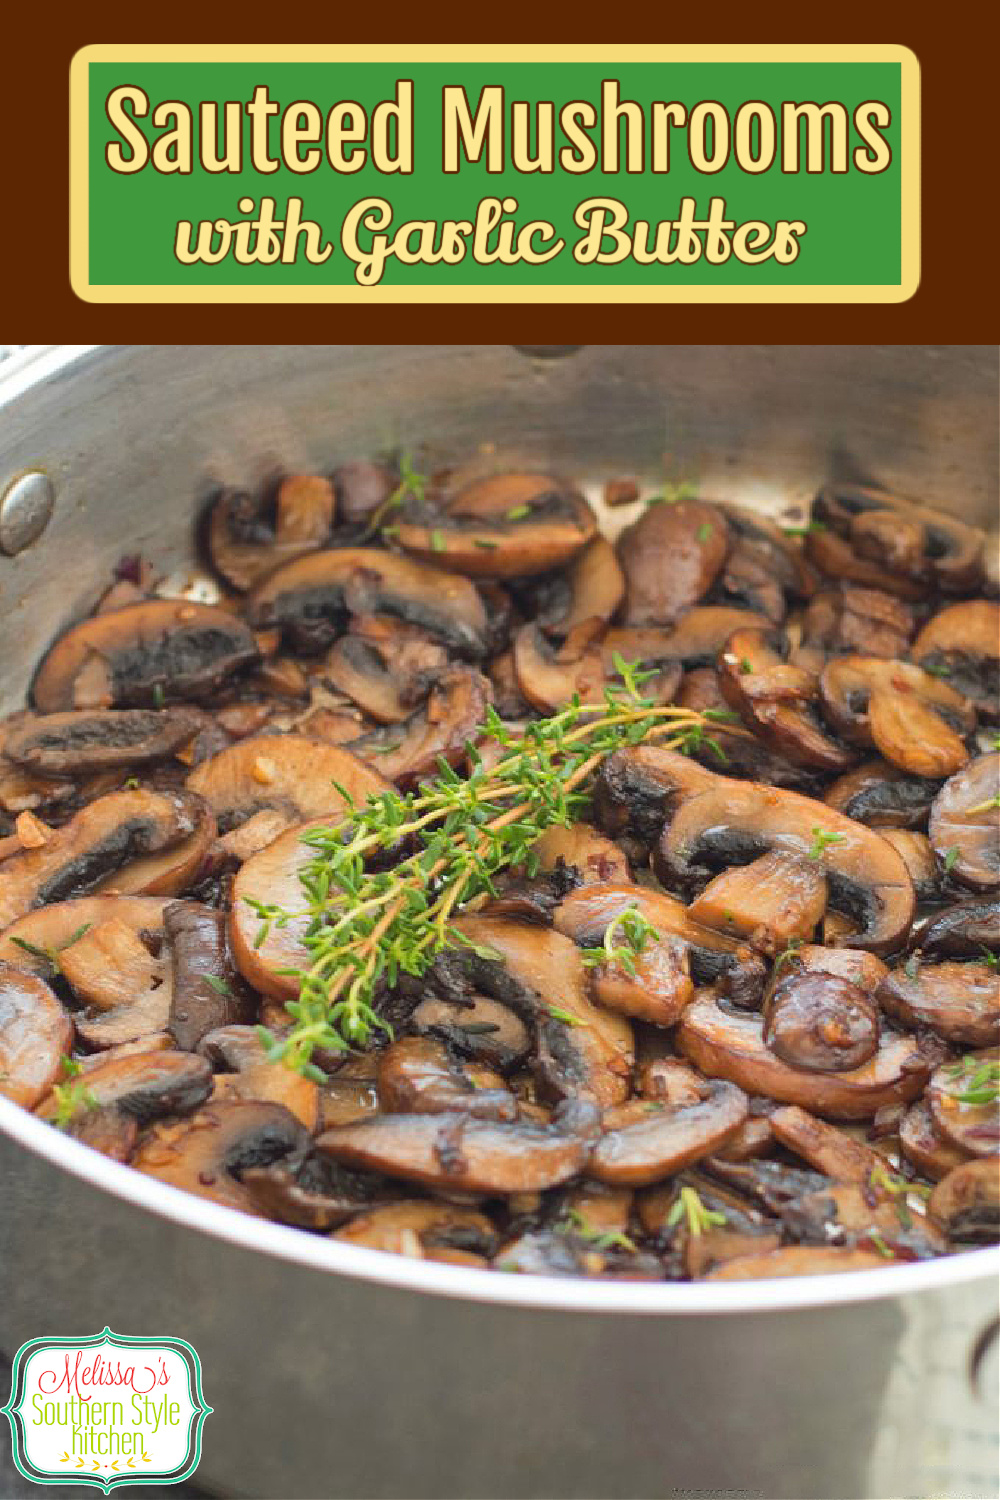 These simple Sauteed Mushrooms with Garlic Butter make a delicious embellishment for steak, chicken, pork and more. #sauteedmushrooms #garlicbutter #garlicmushrooms #portabellamushrooms #shitakemushrooms #mushroomrecipes #sidedishrecipes #food #recipes #southernrecipes #southernfood #creminimushrooms